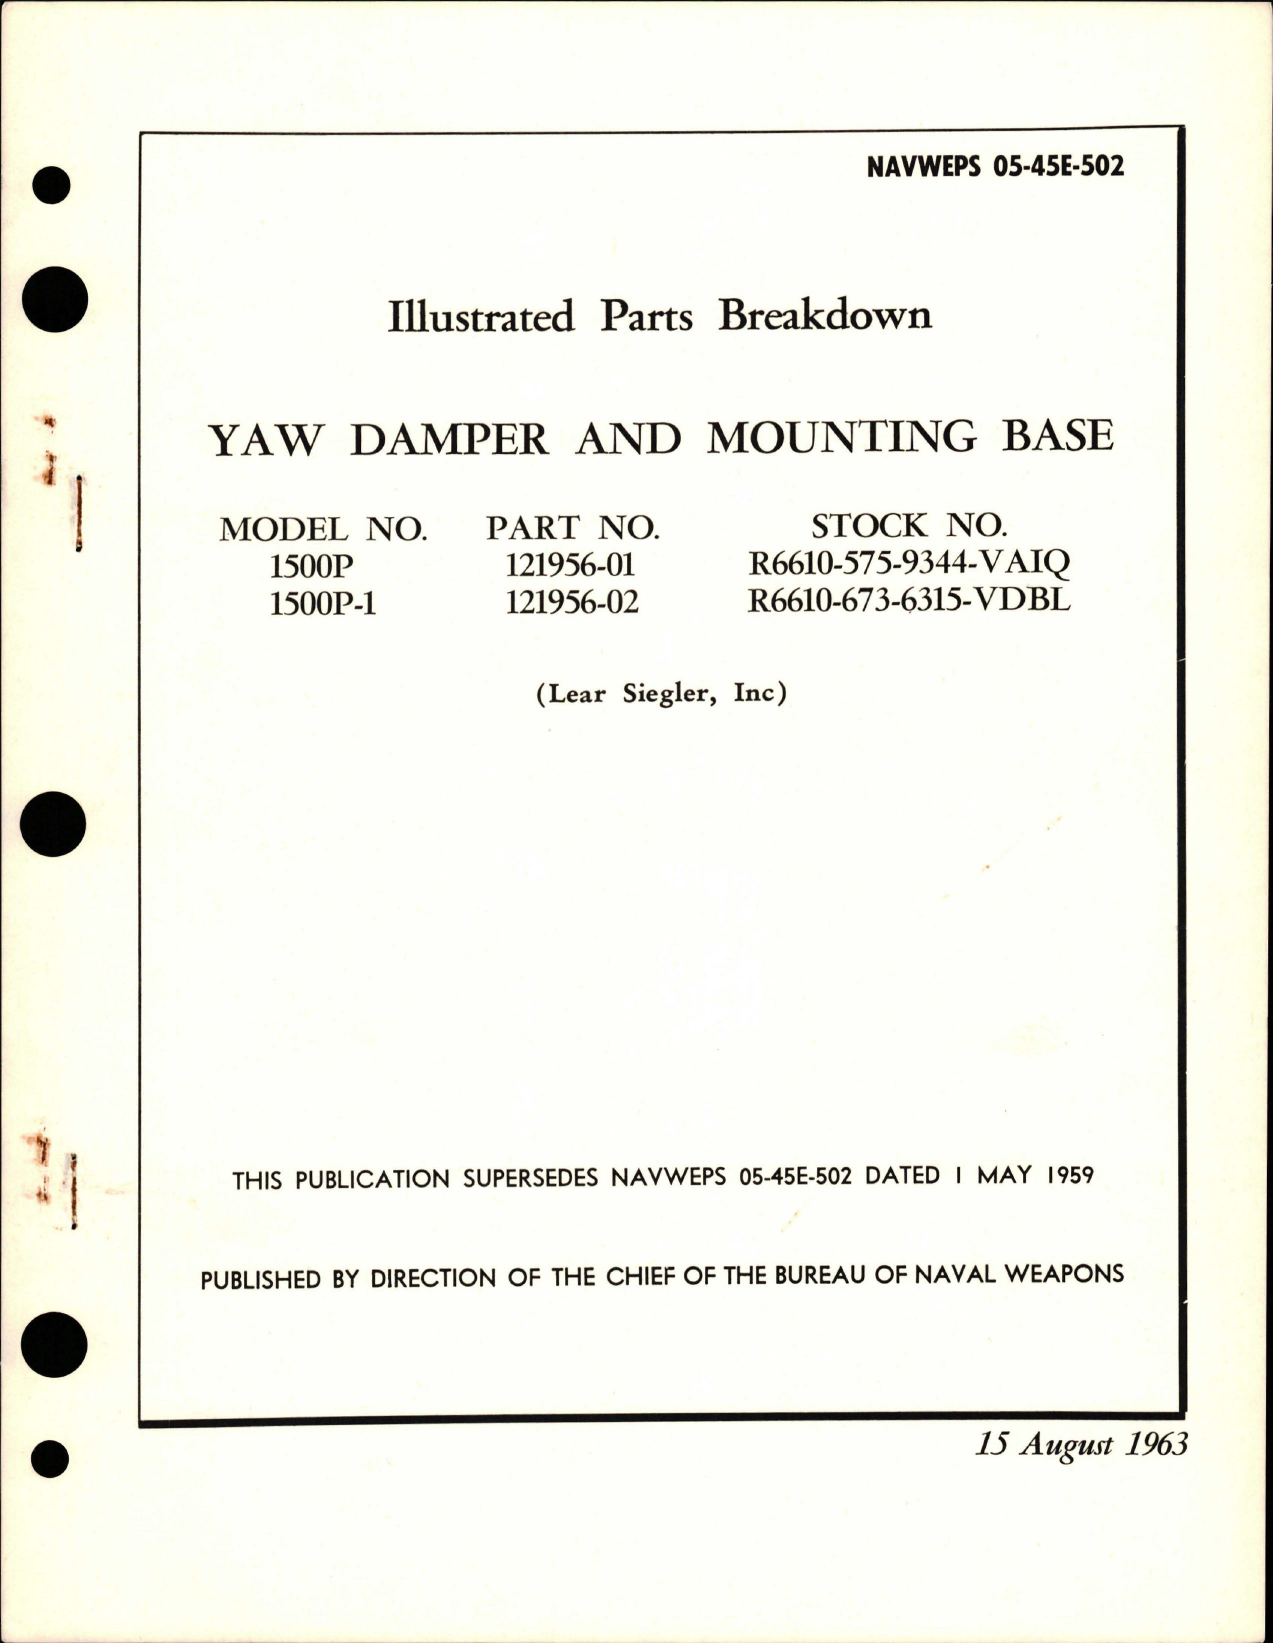 Sample page 1 from AirCorps Library document: Illustrated Parts Breakdown for Yaw Damper and Mounting Base - Models 1500P, and 1500P-1 - Parts 121956-01 and 12156-02